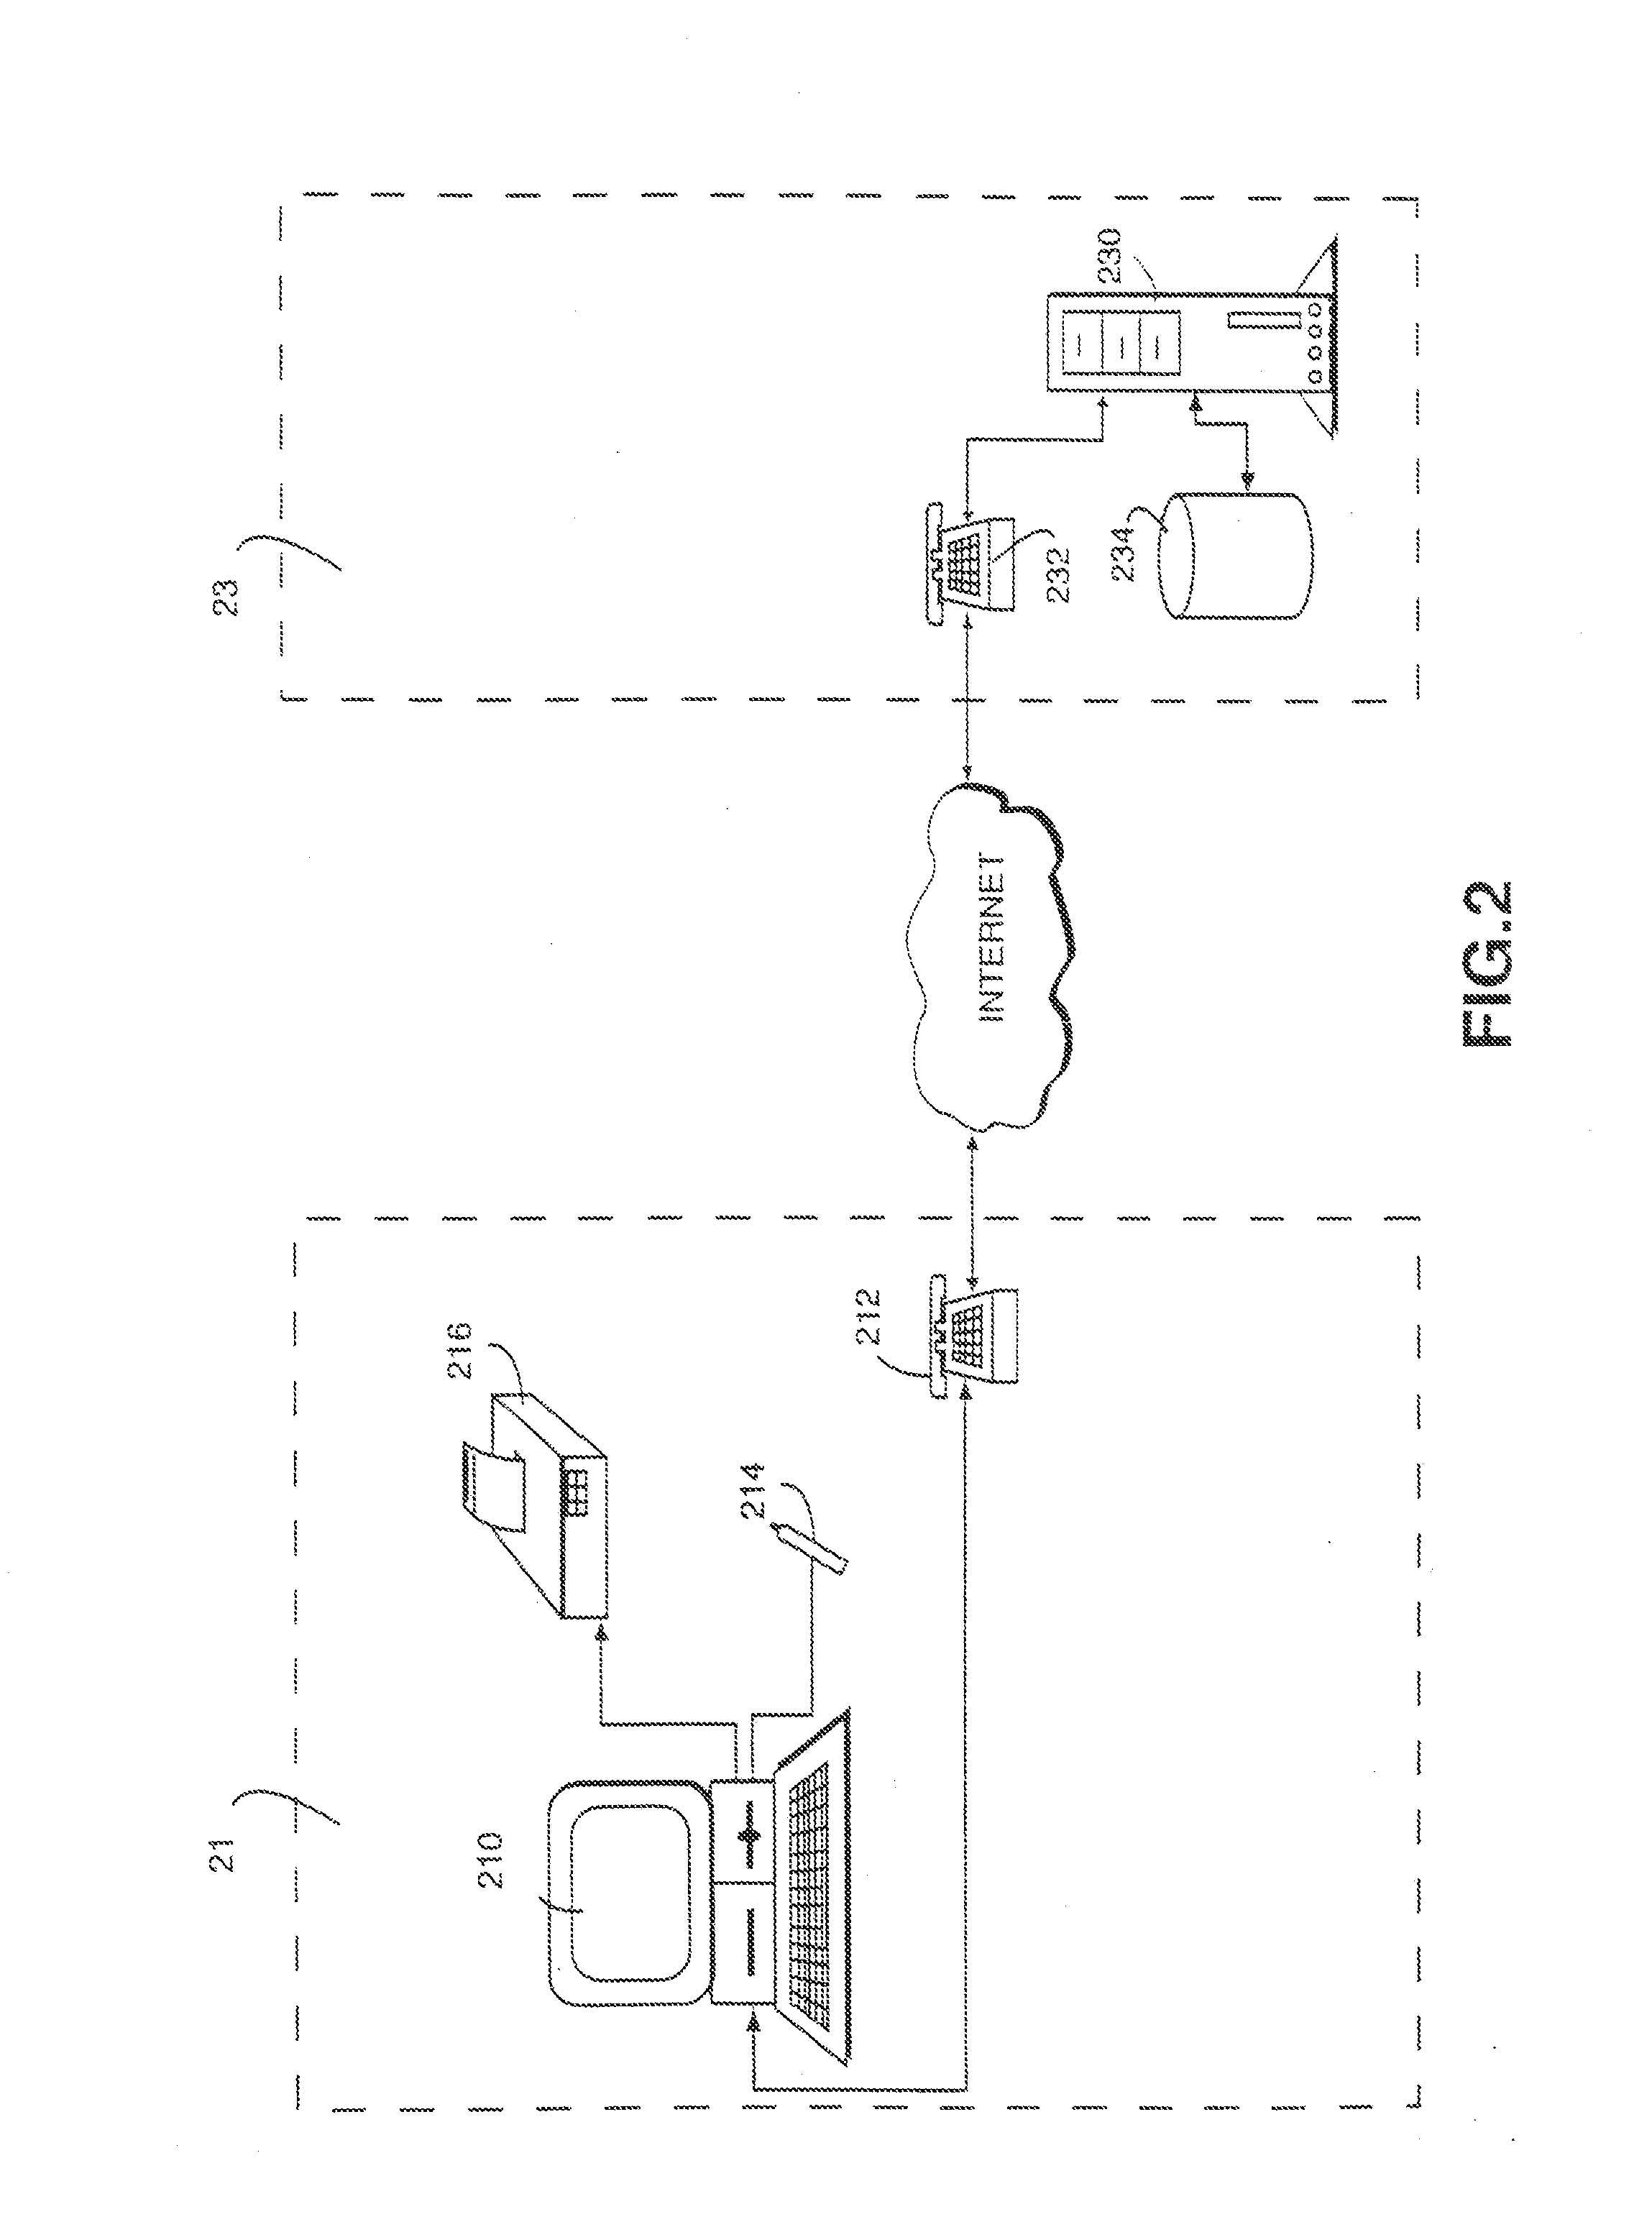 Method and apparatus for efficient handling of product return transactions